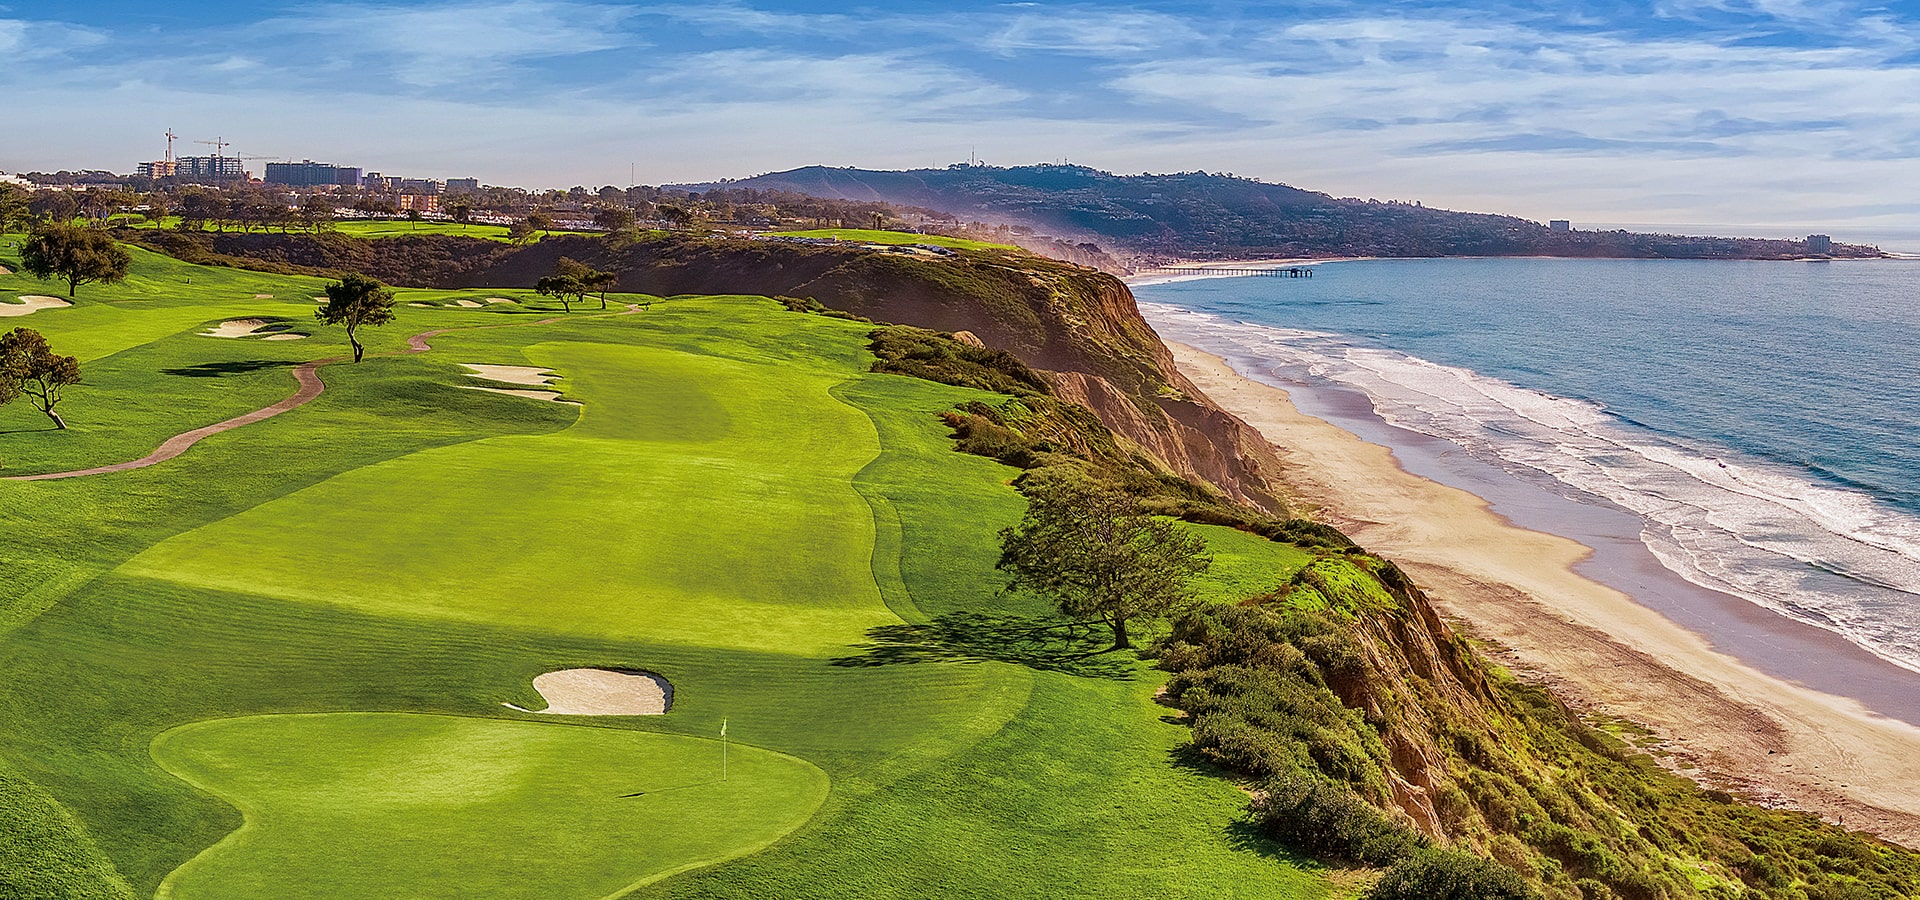 Torrey Pines Golf Course Will Again Test the Worlds Most Elite Golfers at the